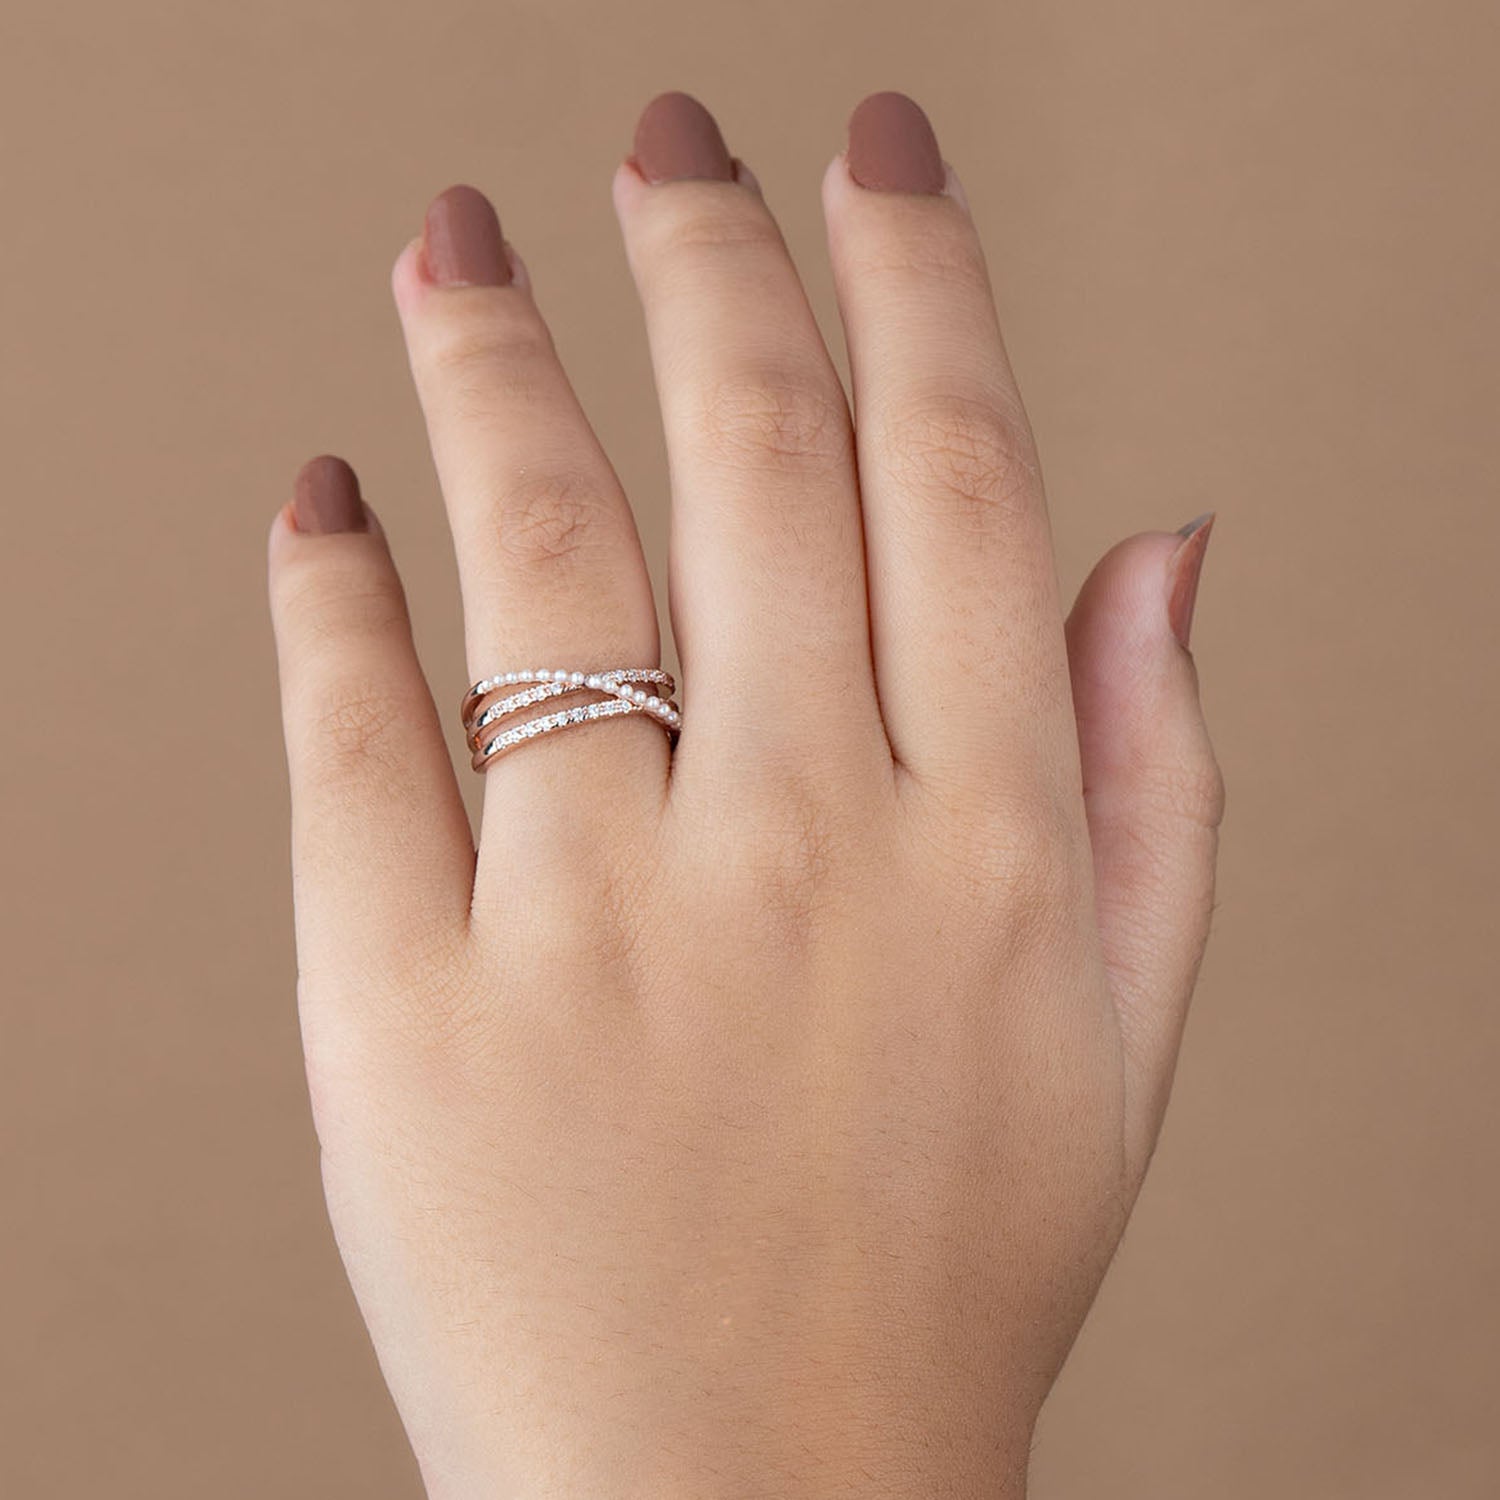 Rose Gold Infinity Pearl Adjustable Ring